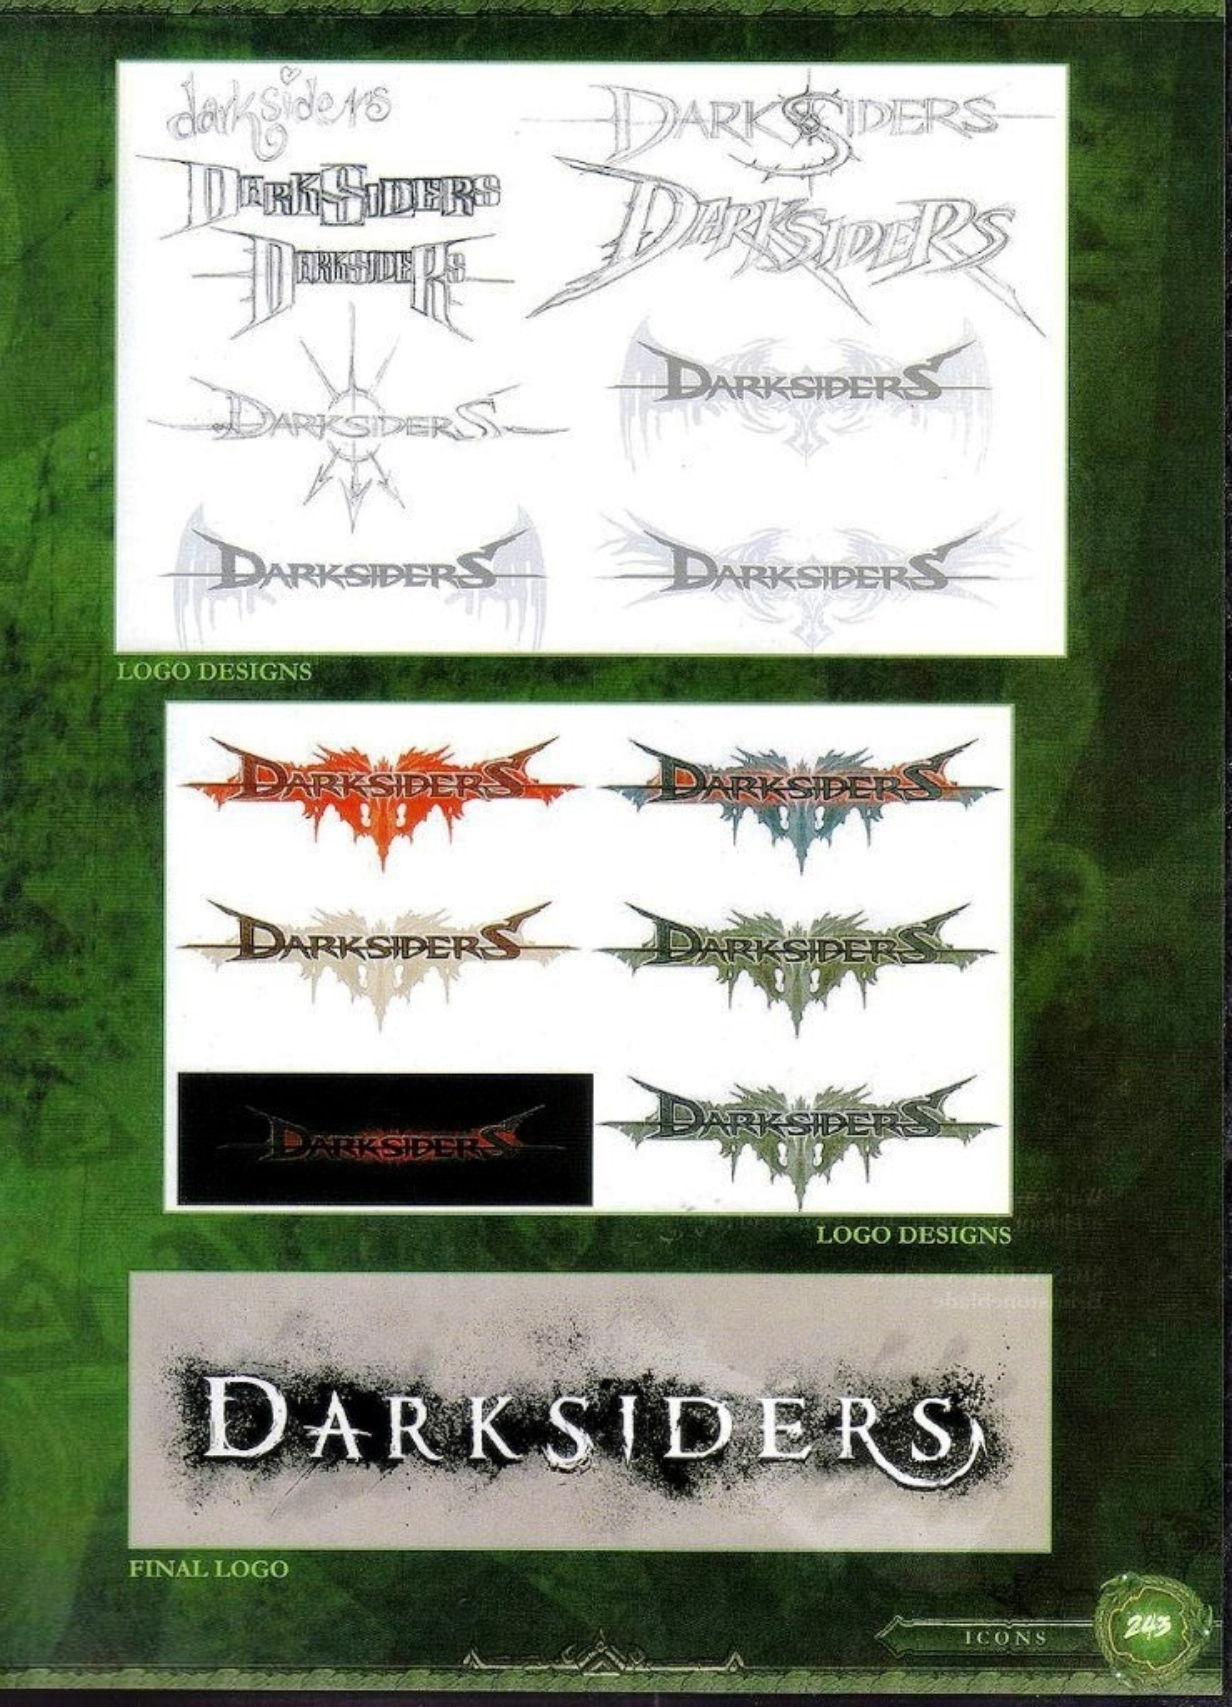 The Art of Darksiders (low-res, missing pages, and watermarked) 239